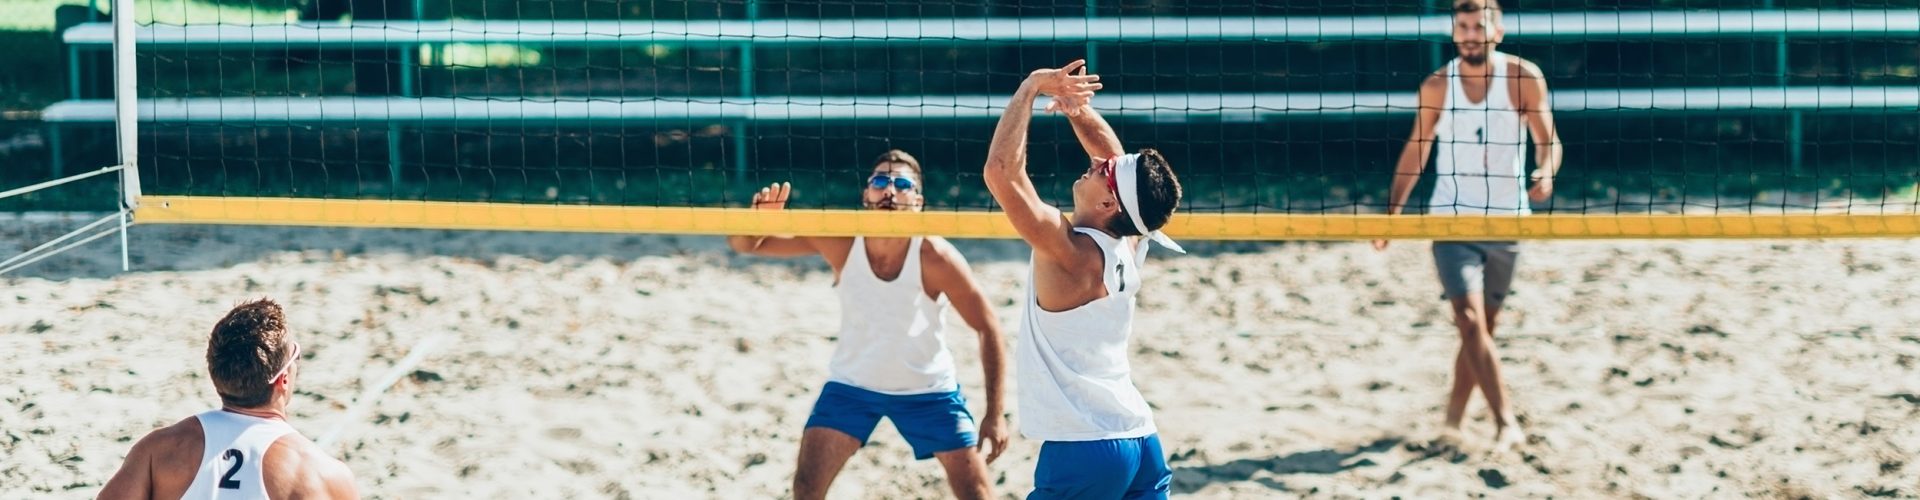 Beach Volleyball Players during Game